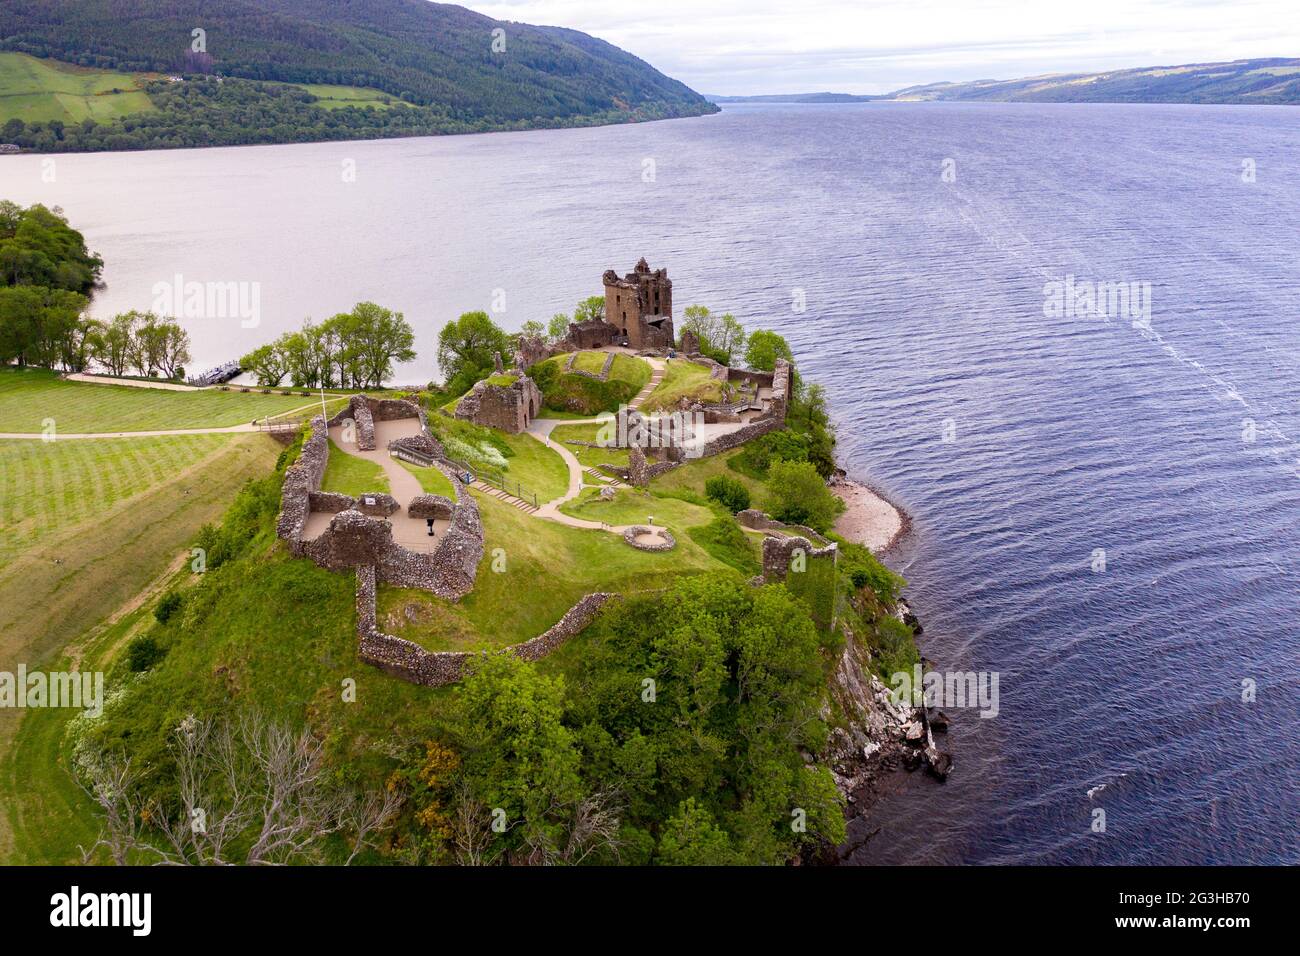 Urquhart Castle, Loch Ness, Scotland, UK. 12 June 2021. Pictured: Drone aerial photography view from above of Urquhart Castle, a ruin, sits beside Loch Ness in the Highlands of Scotland. The castle is on the A82 road, 21 kilometres south-west of Inverness and 2 kilometres east of the village of Drumnadrochit. Credit: Colin Fisher/Alamy Live News. Stock Photo